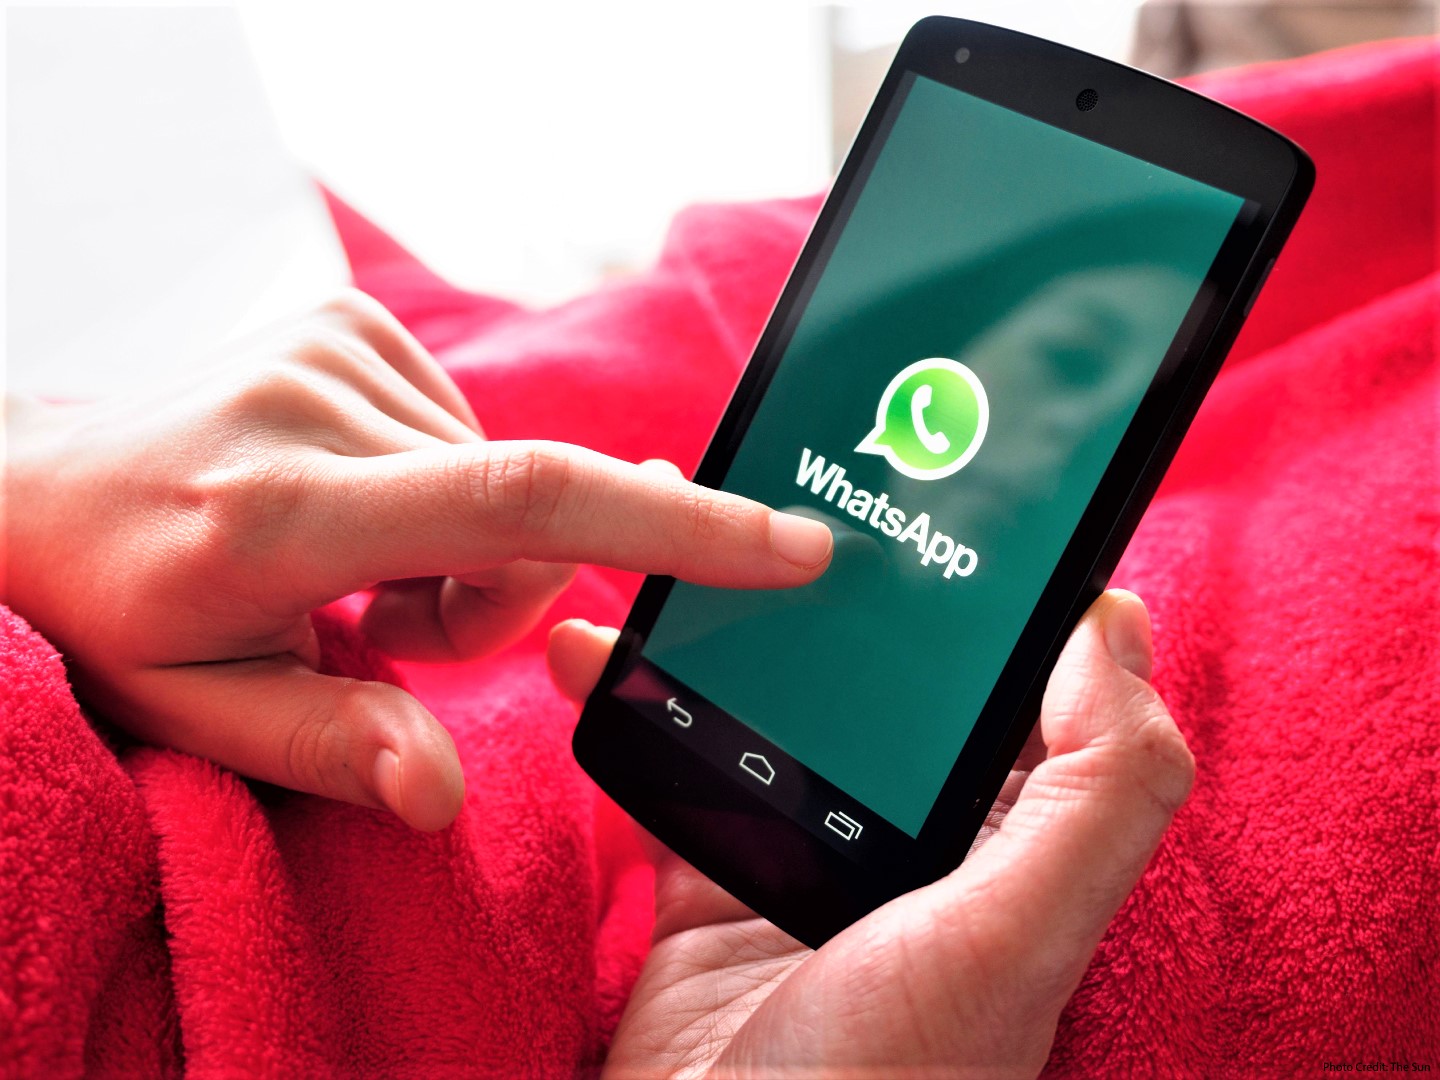 WhatsApp contact filter generates filtered numbers